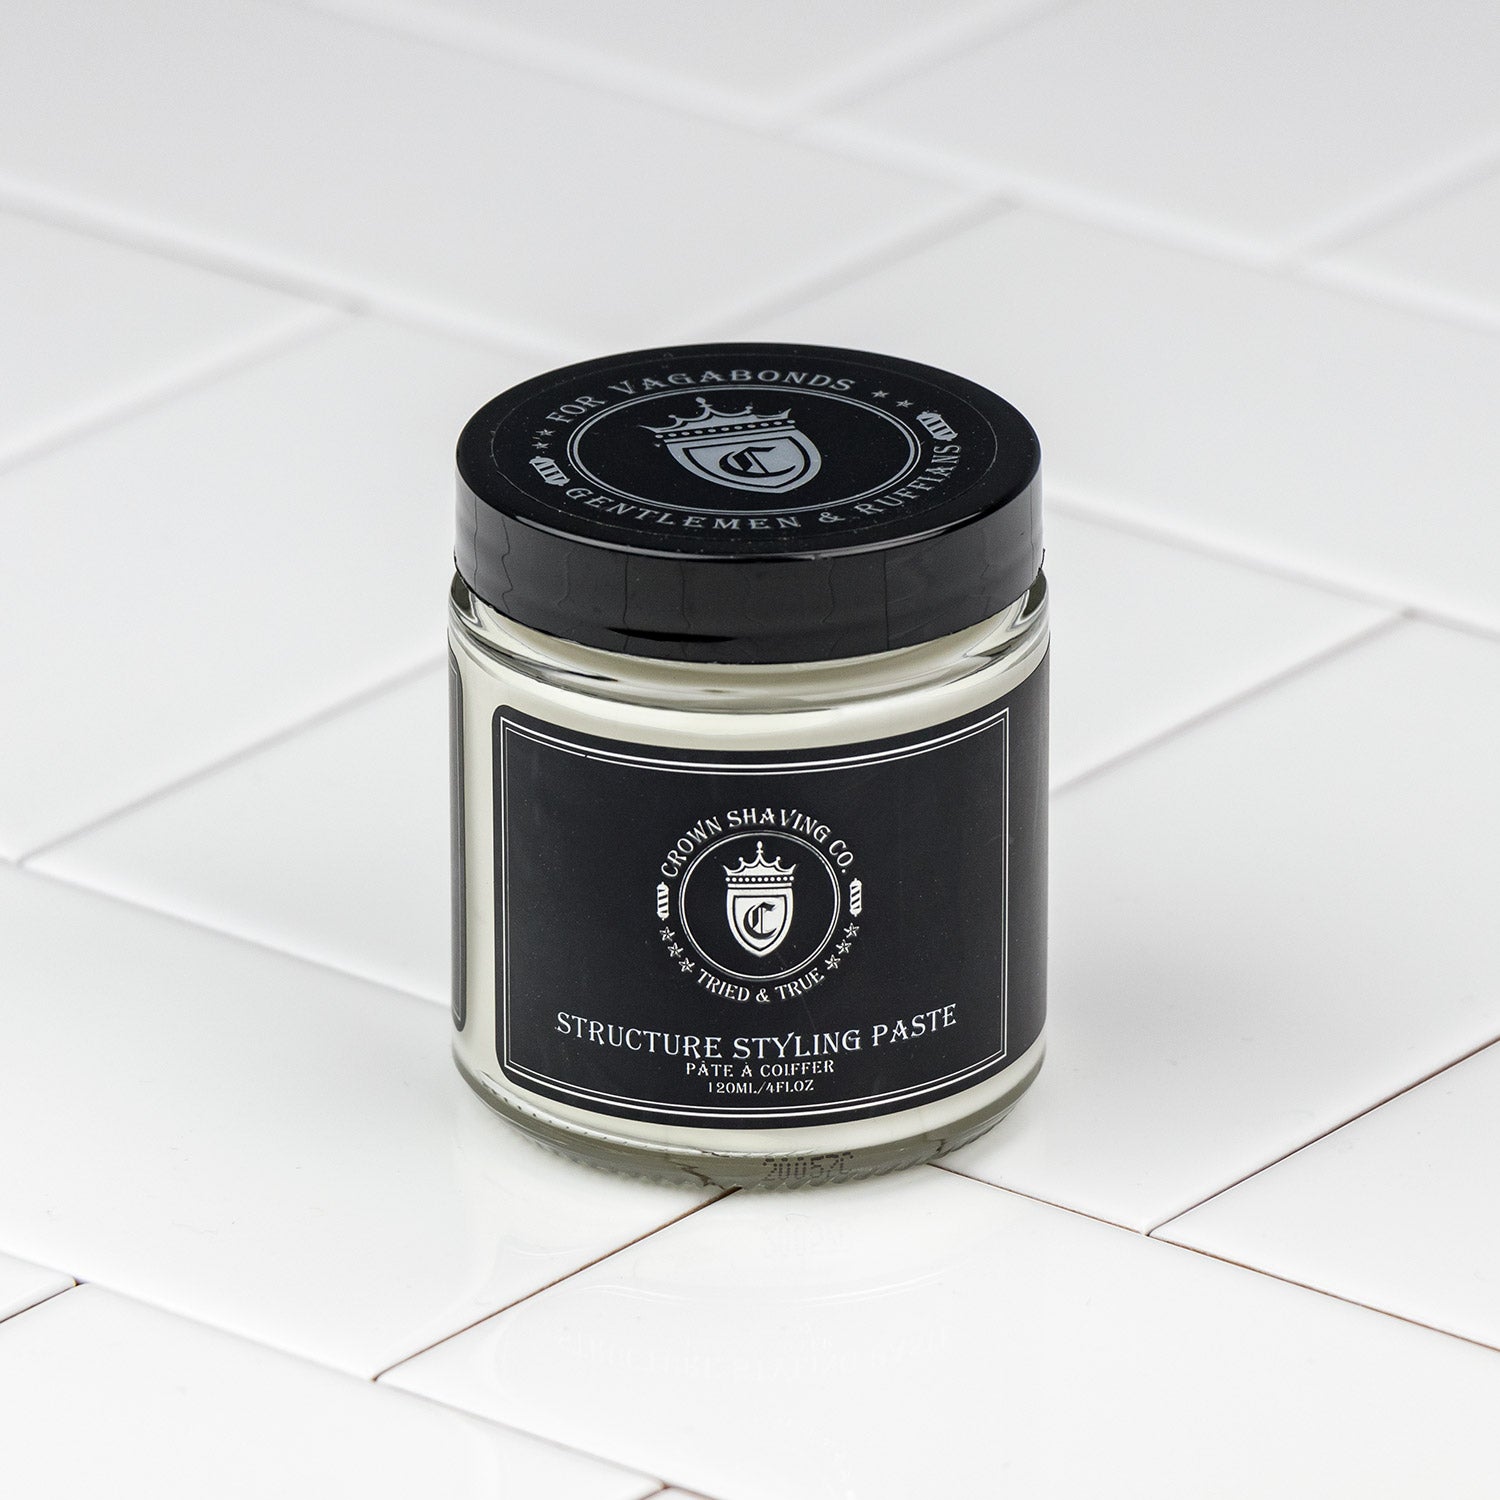 Crown Shaving Co. Structure Styling Paste